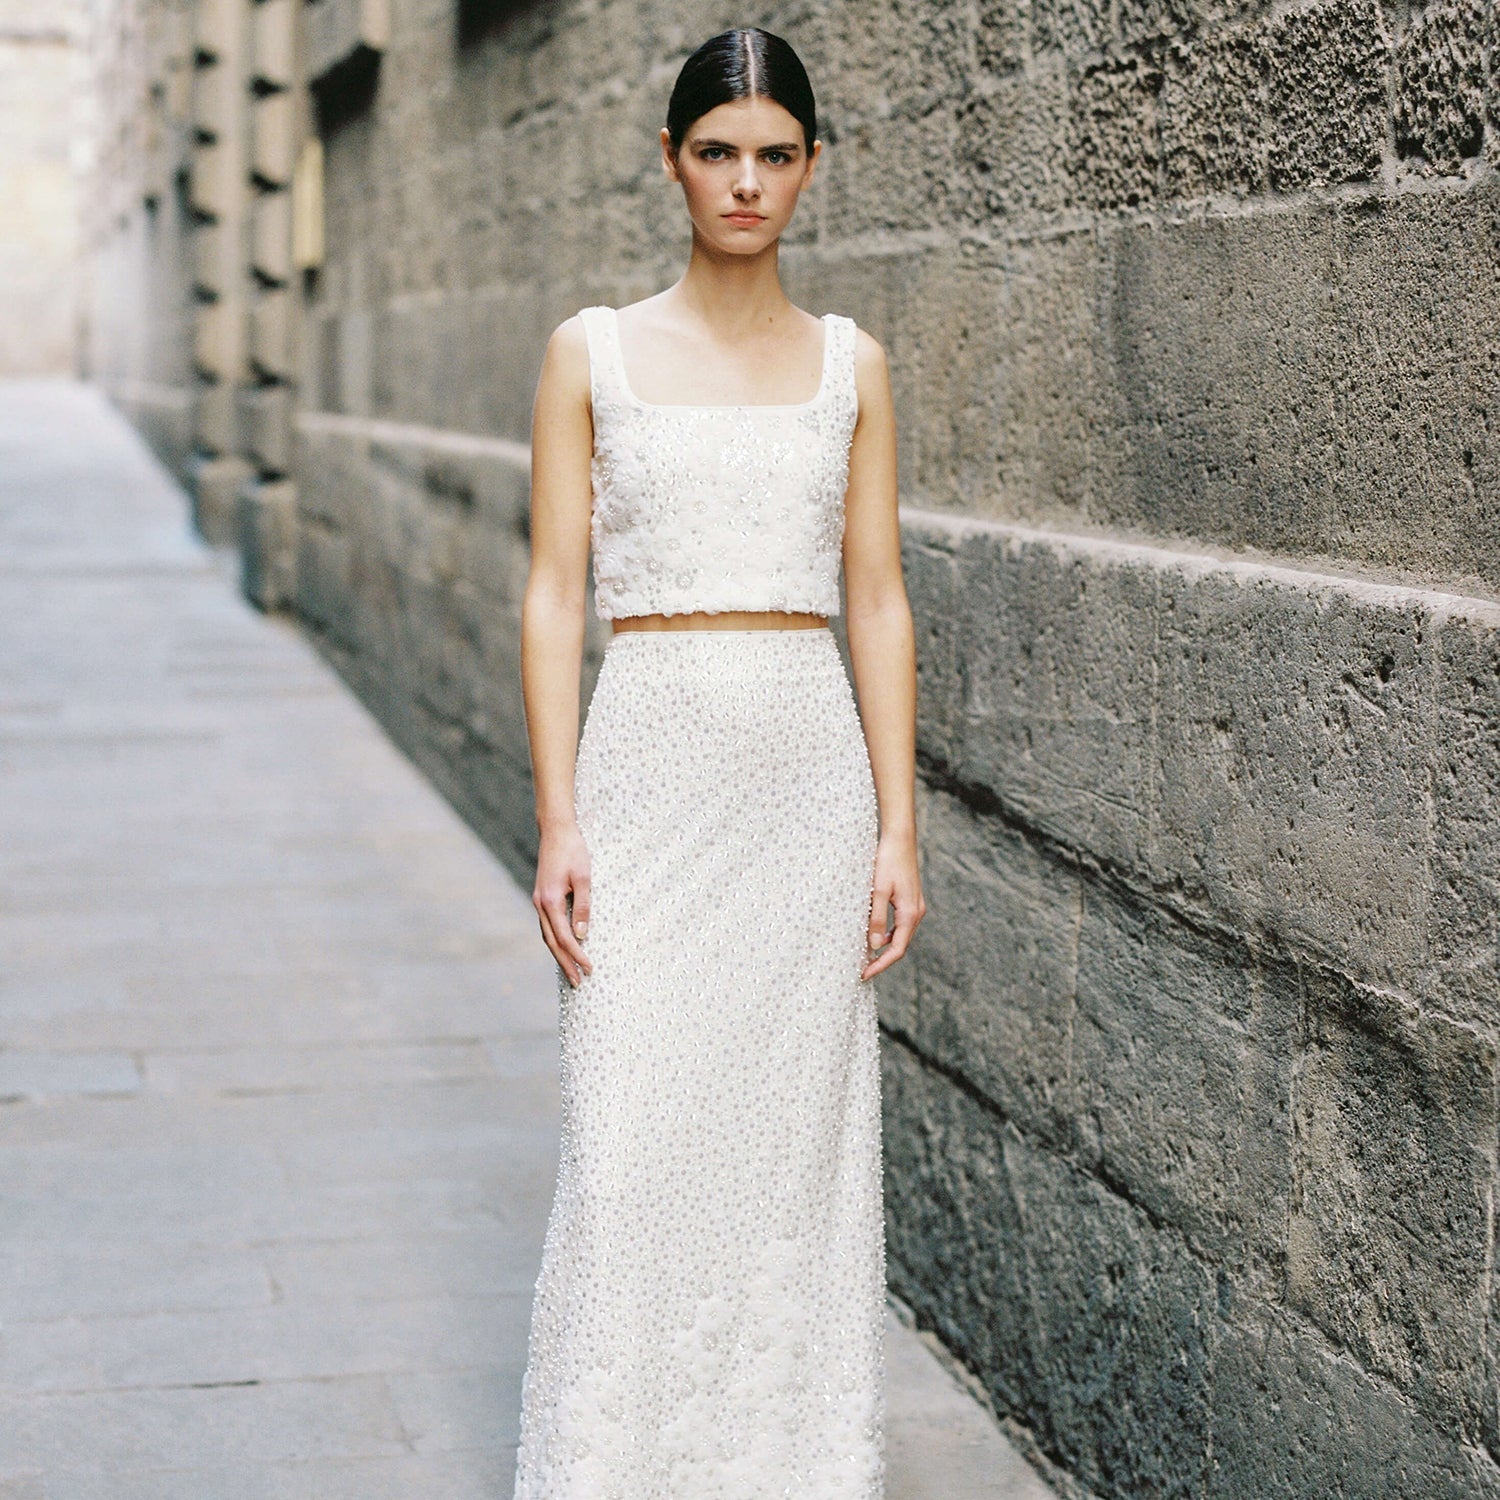 A woman wearing the White Beaded Sequin Maxi Skirt